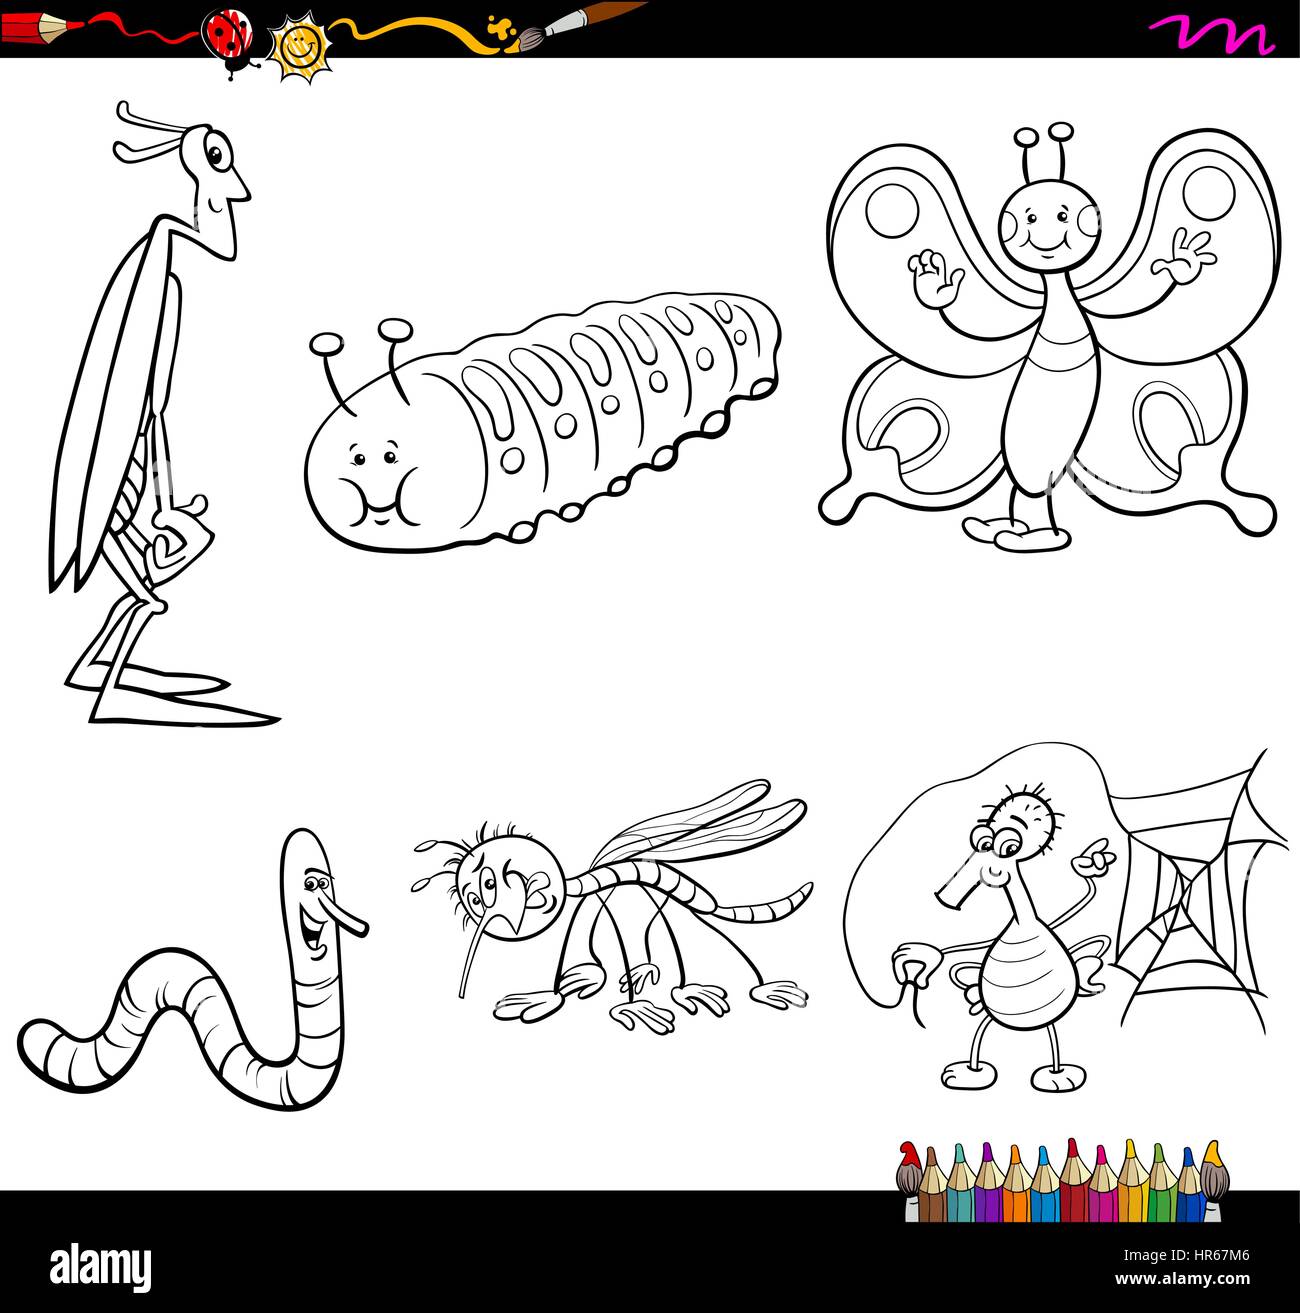 Black and White Cartoon Illustration of Insect Characters Set Coloring Page Stock Vector